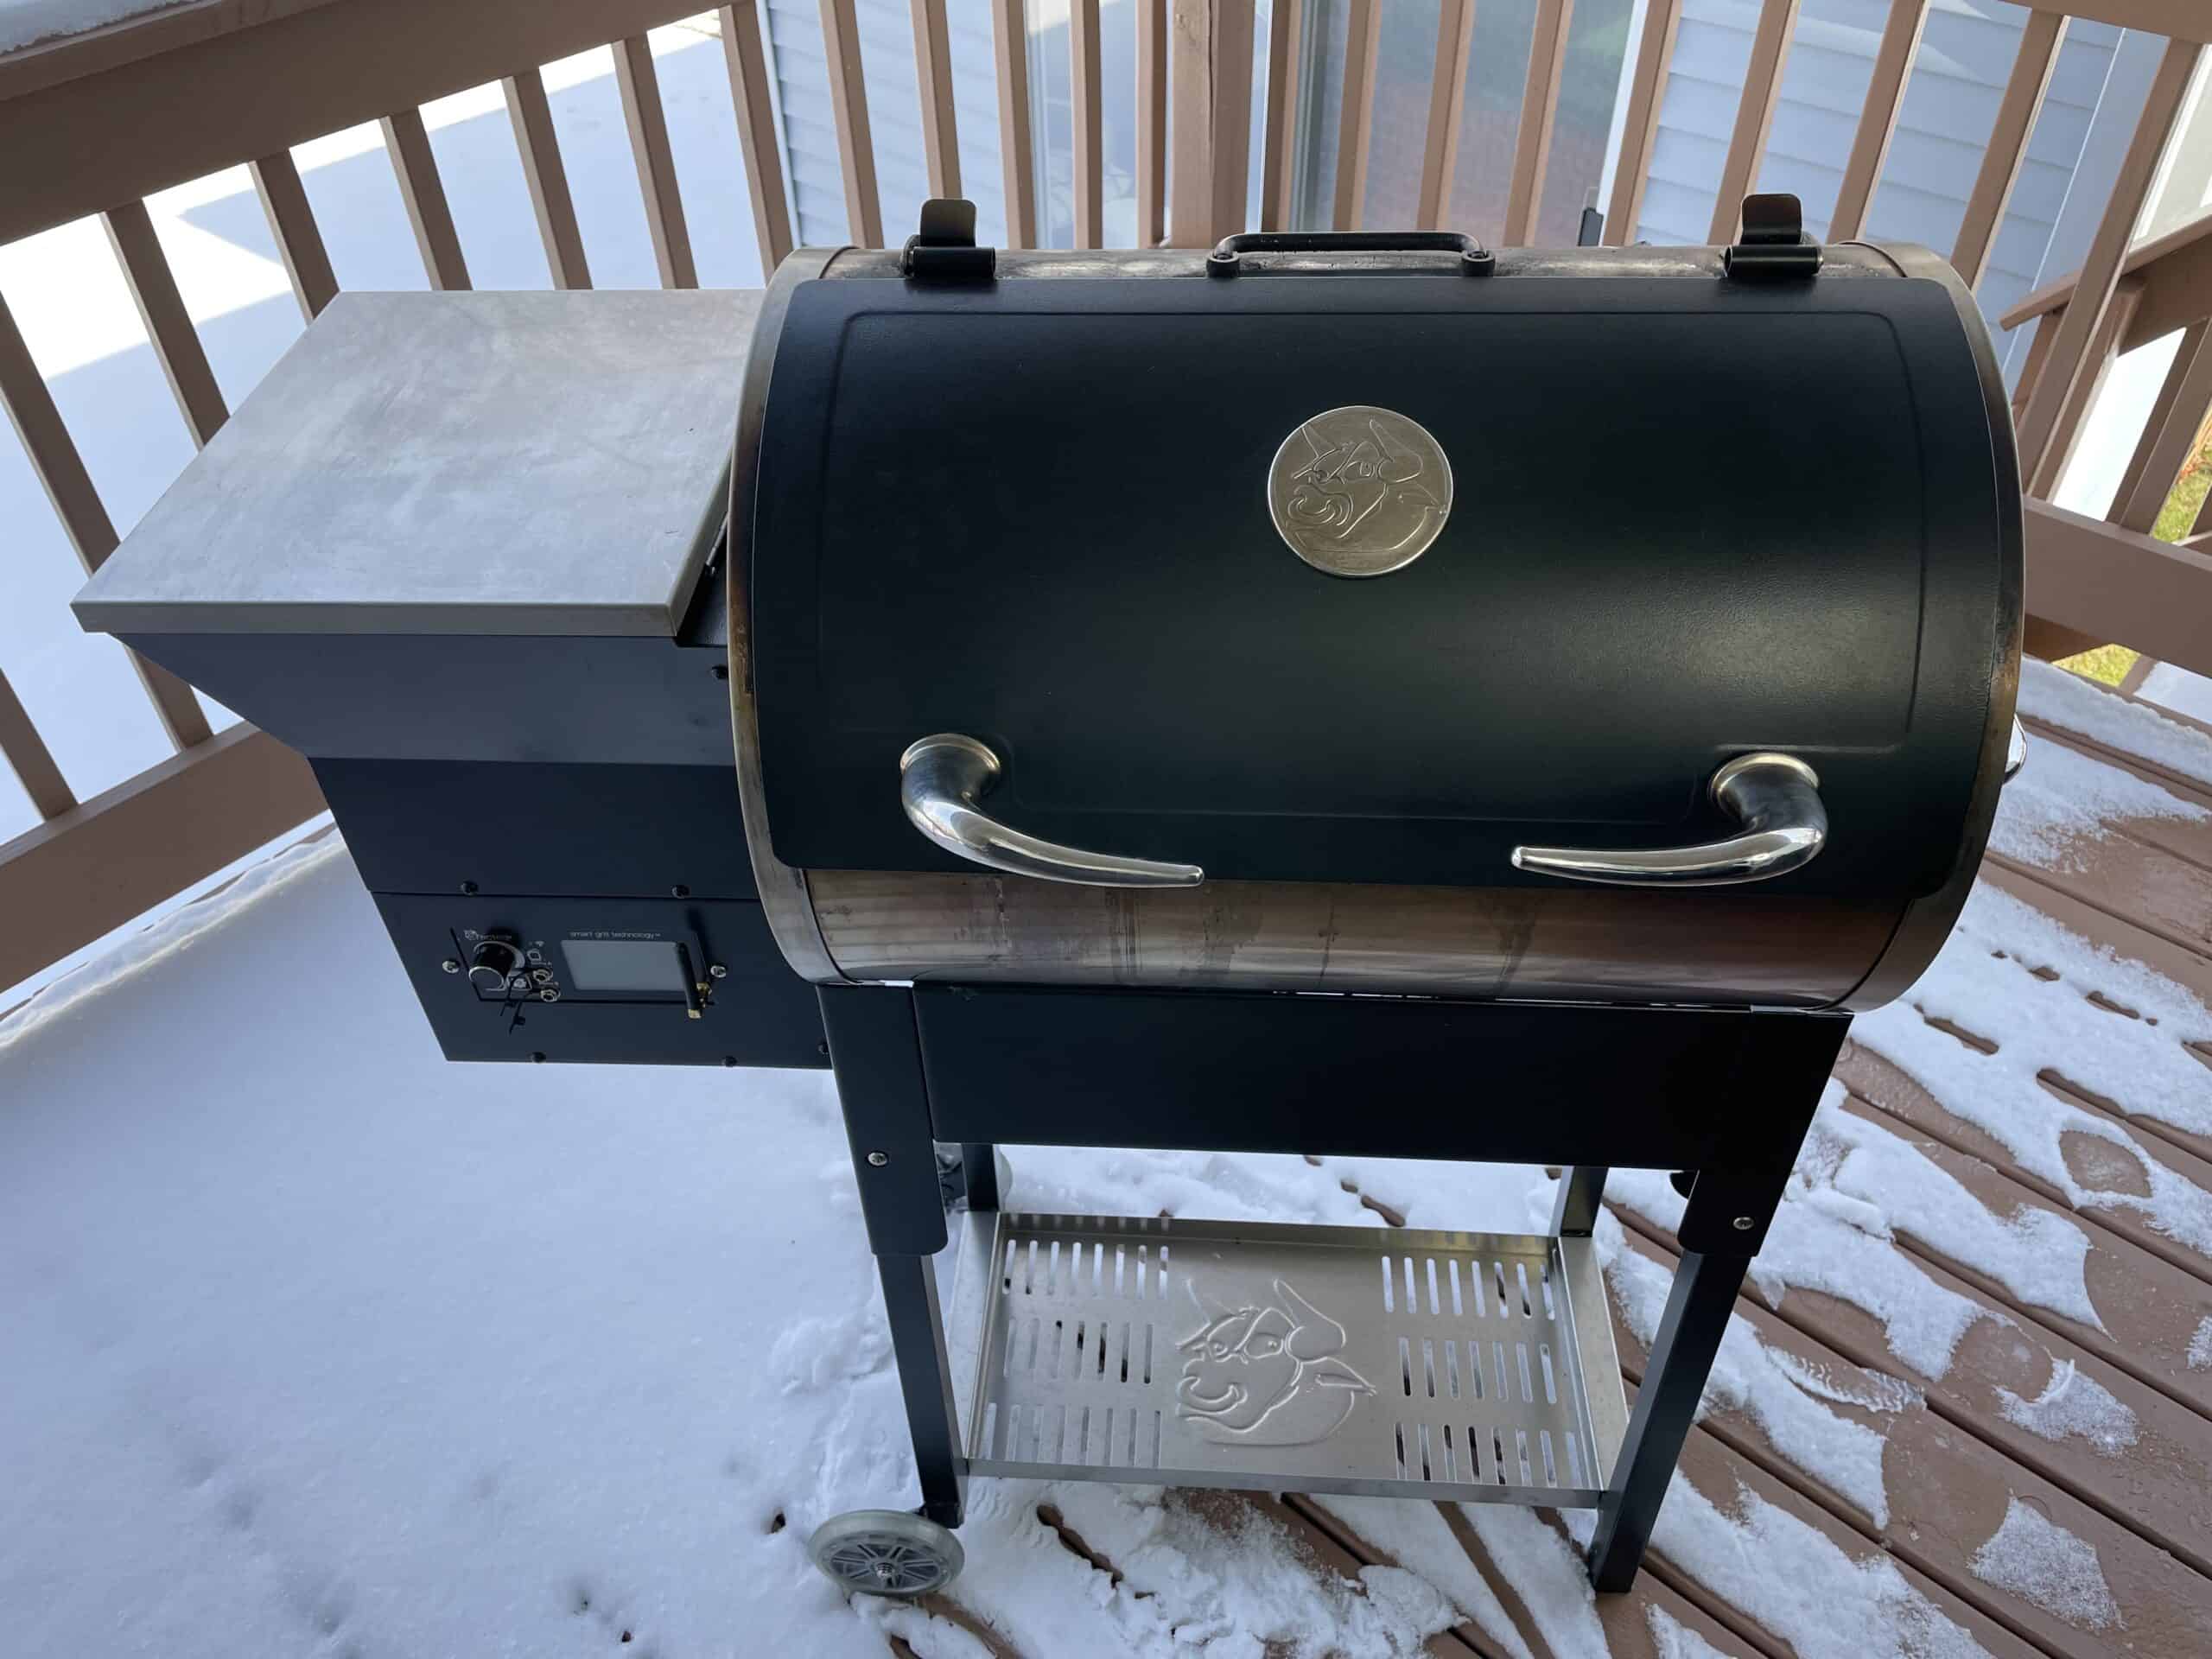 Recteq Grill - From Michigan To The Table